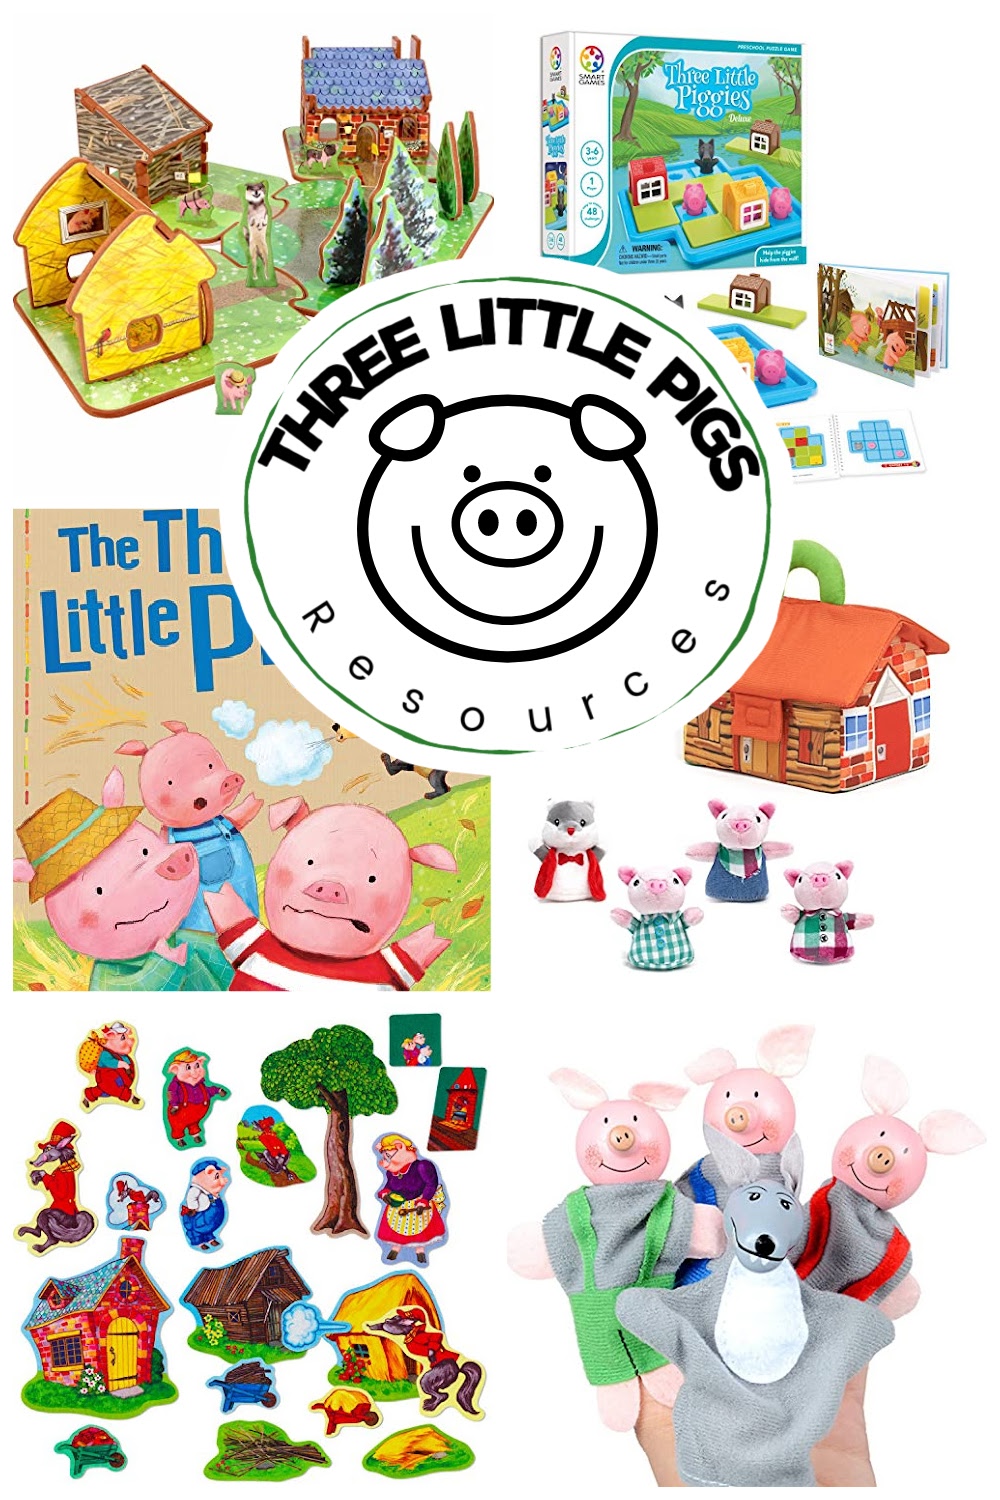 3-lil-pigs-1 Three Little Pigs Resources